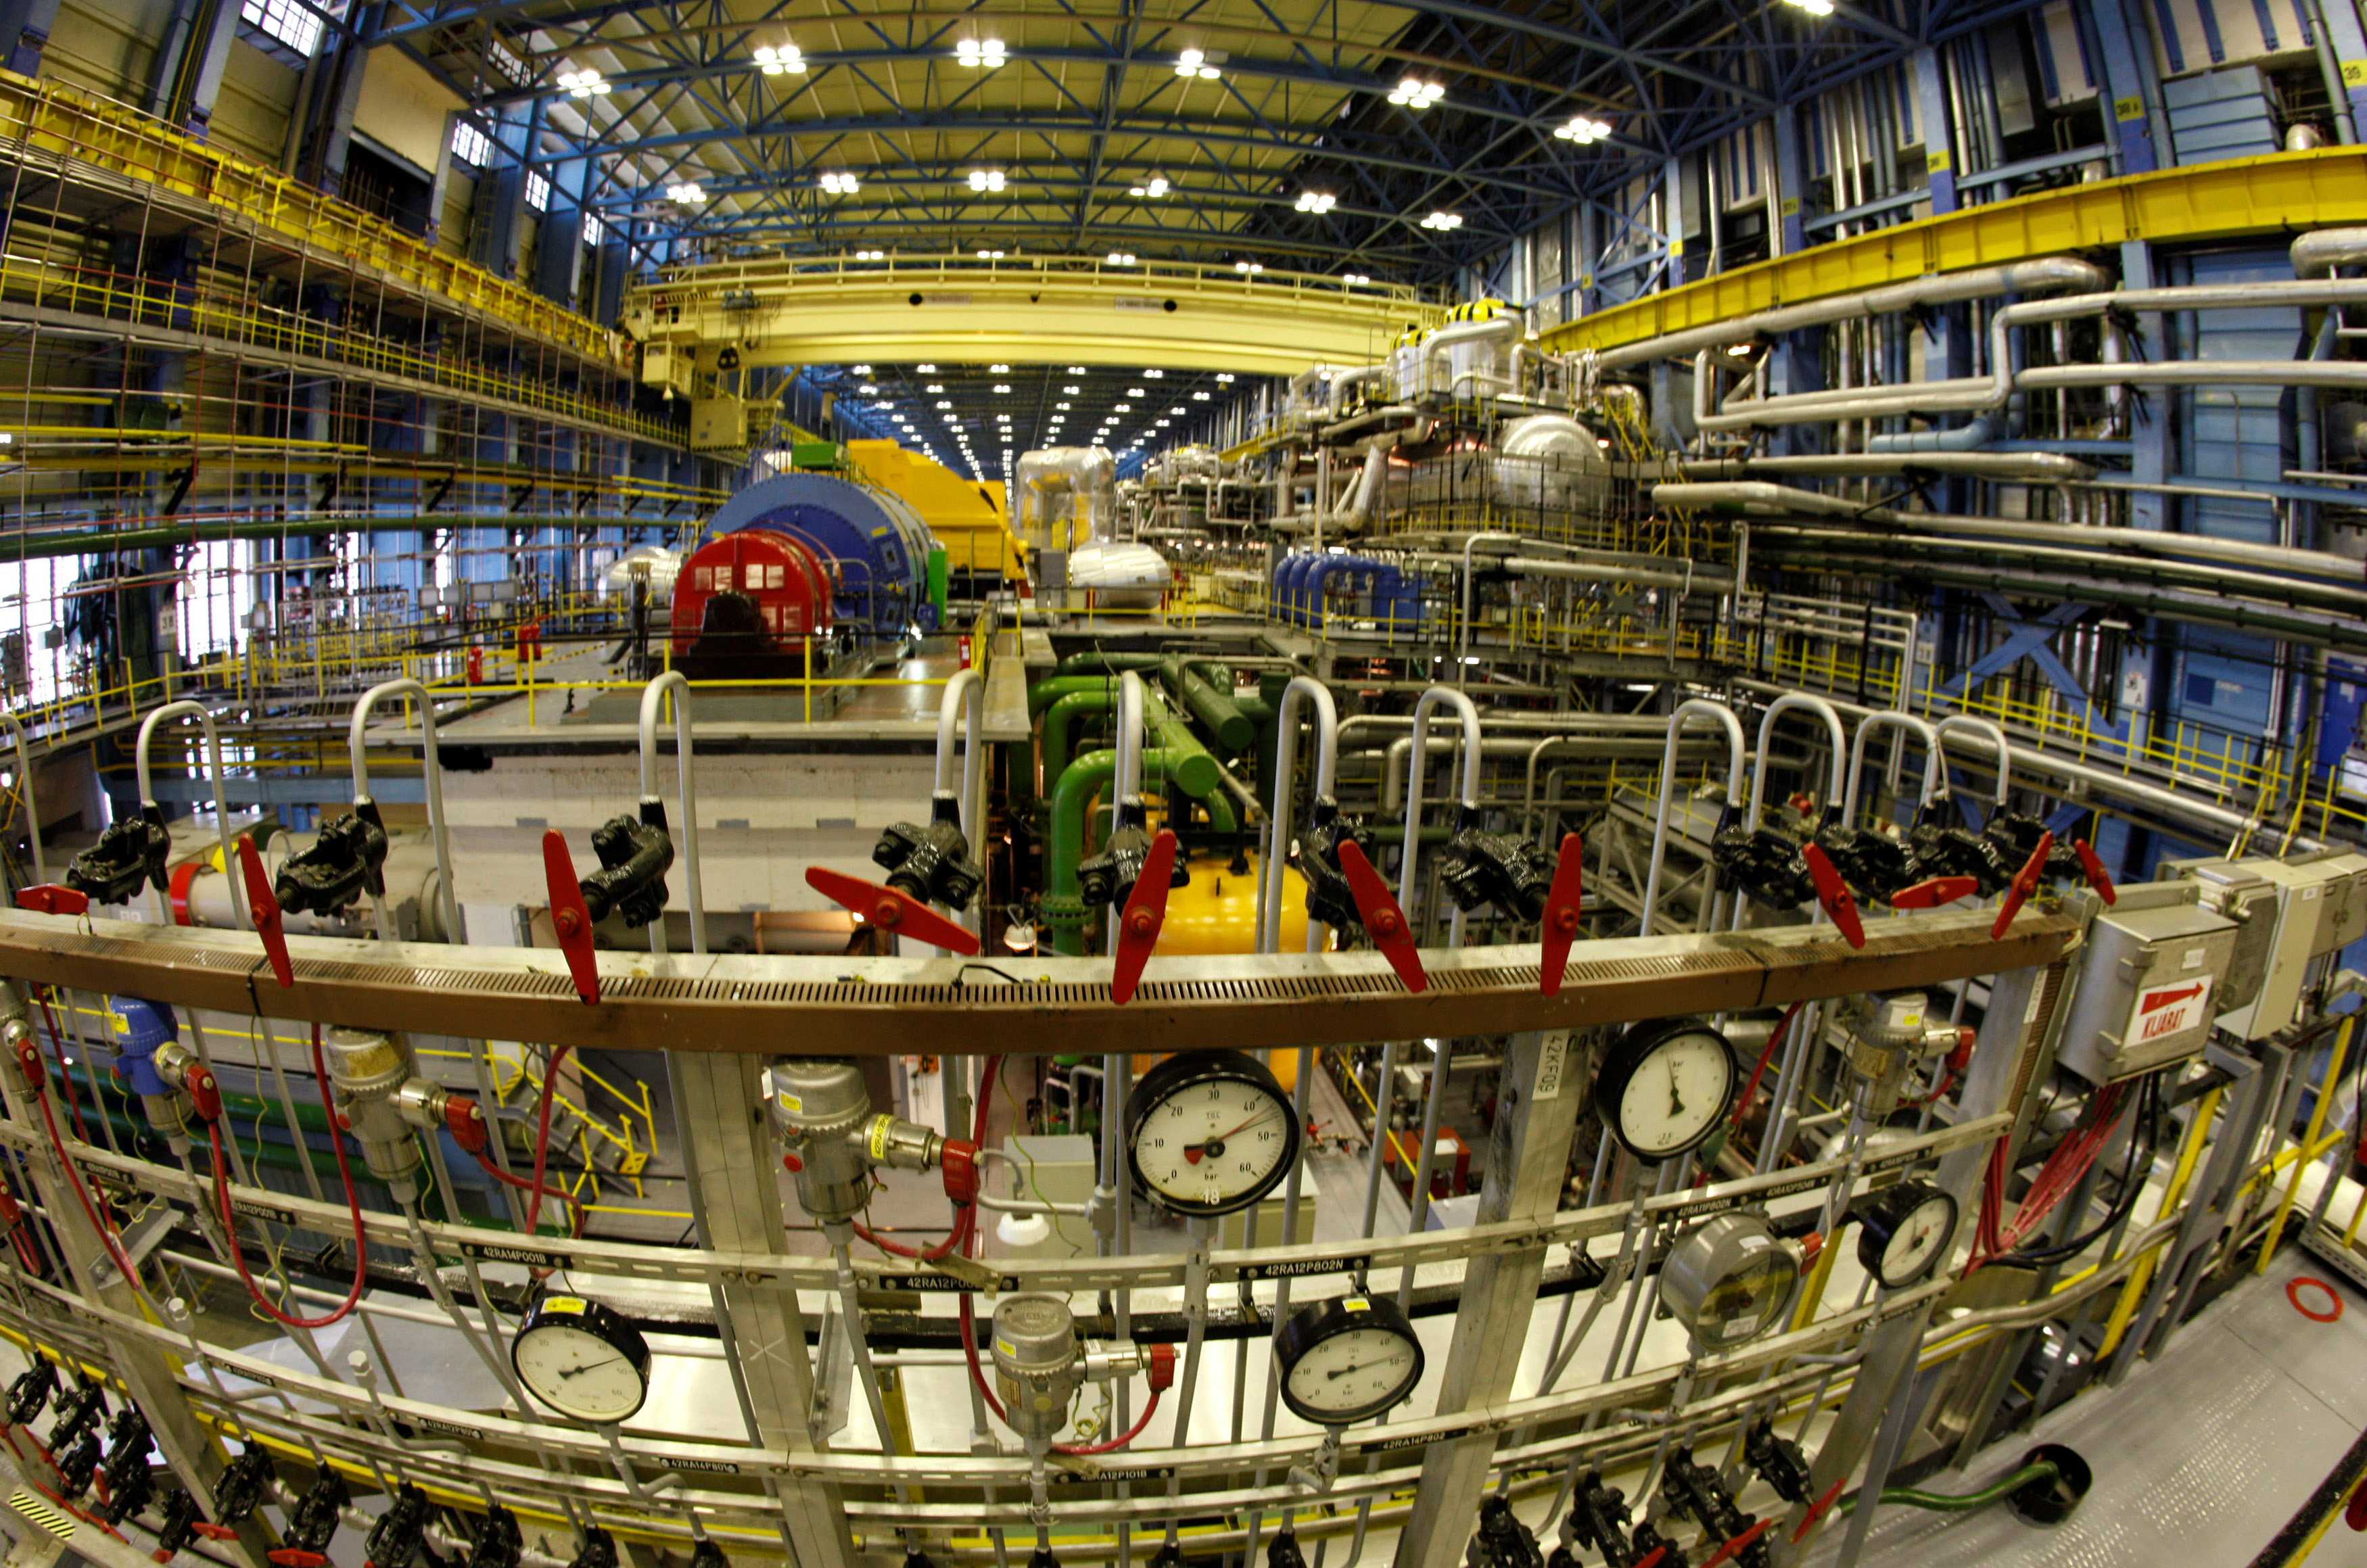 A general view of the turbine hall of reactor unit number four of the Paks nuclear power plant in Paks